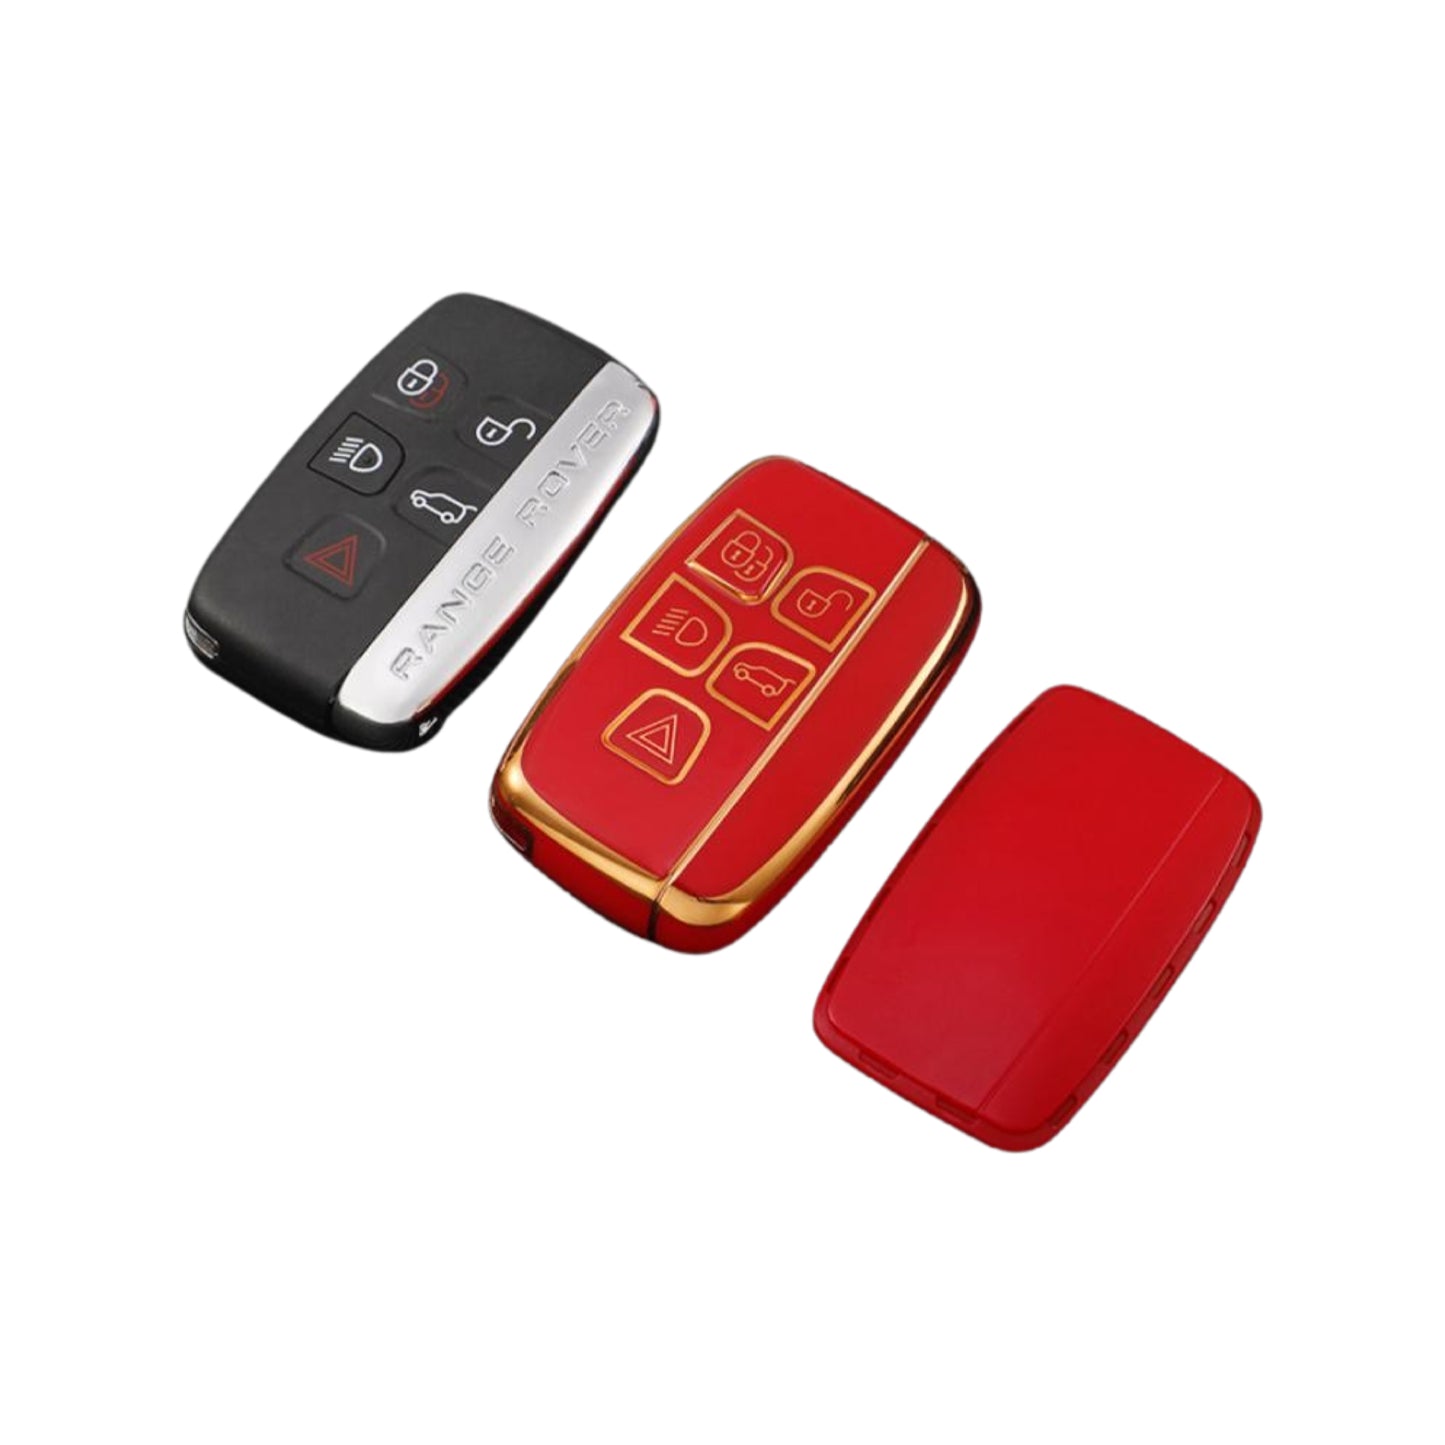 Land Rover key cover | Range Rover, Freelander, Evoque, Discovery key fob case | Land Rover Accessories - Keysleeves